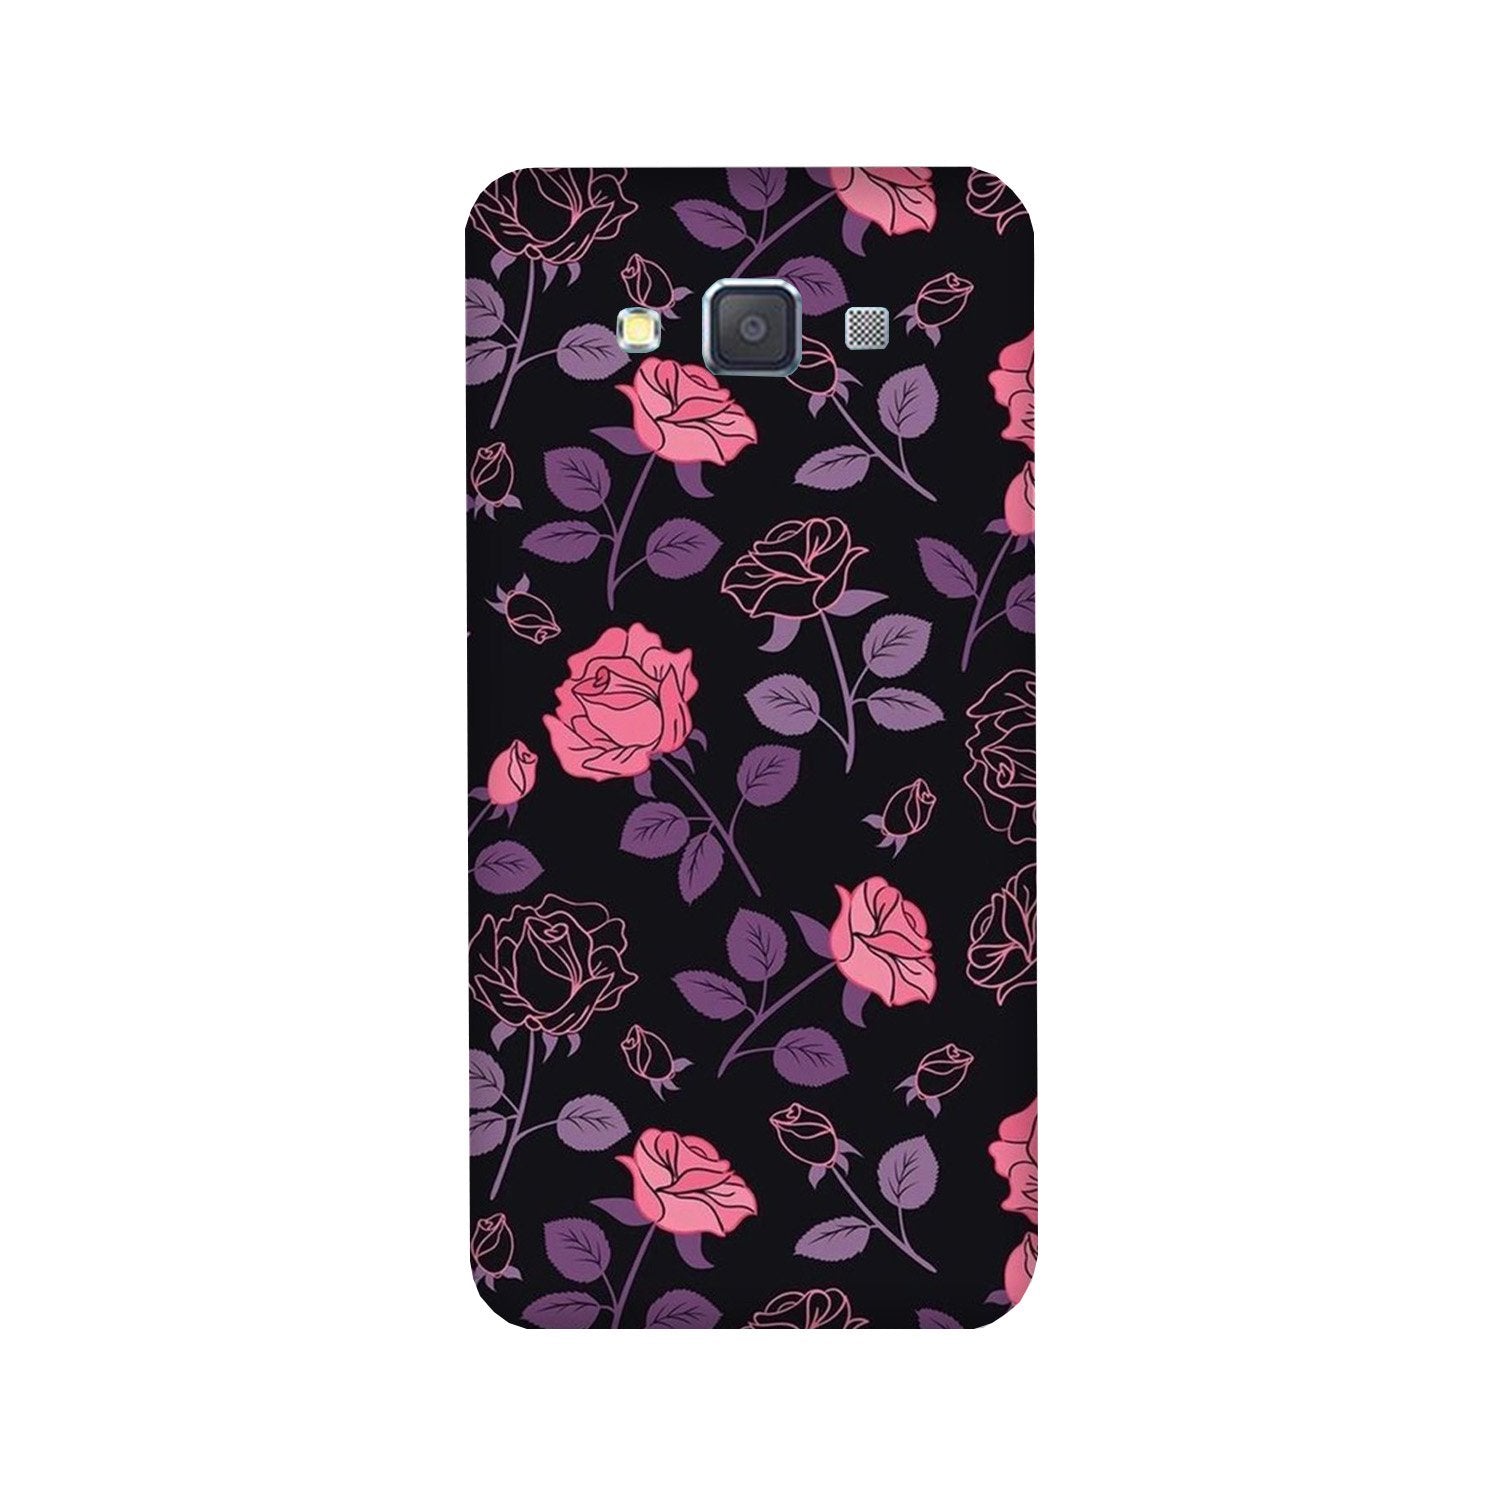 Rose Pattern Case for Galaxy J7 (2016)